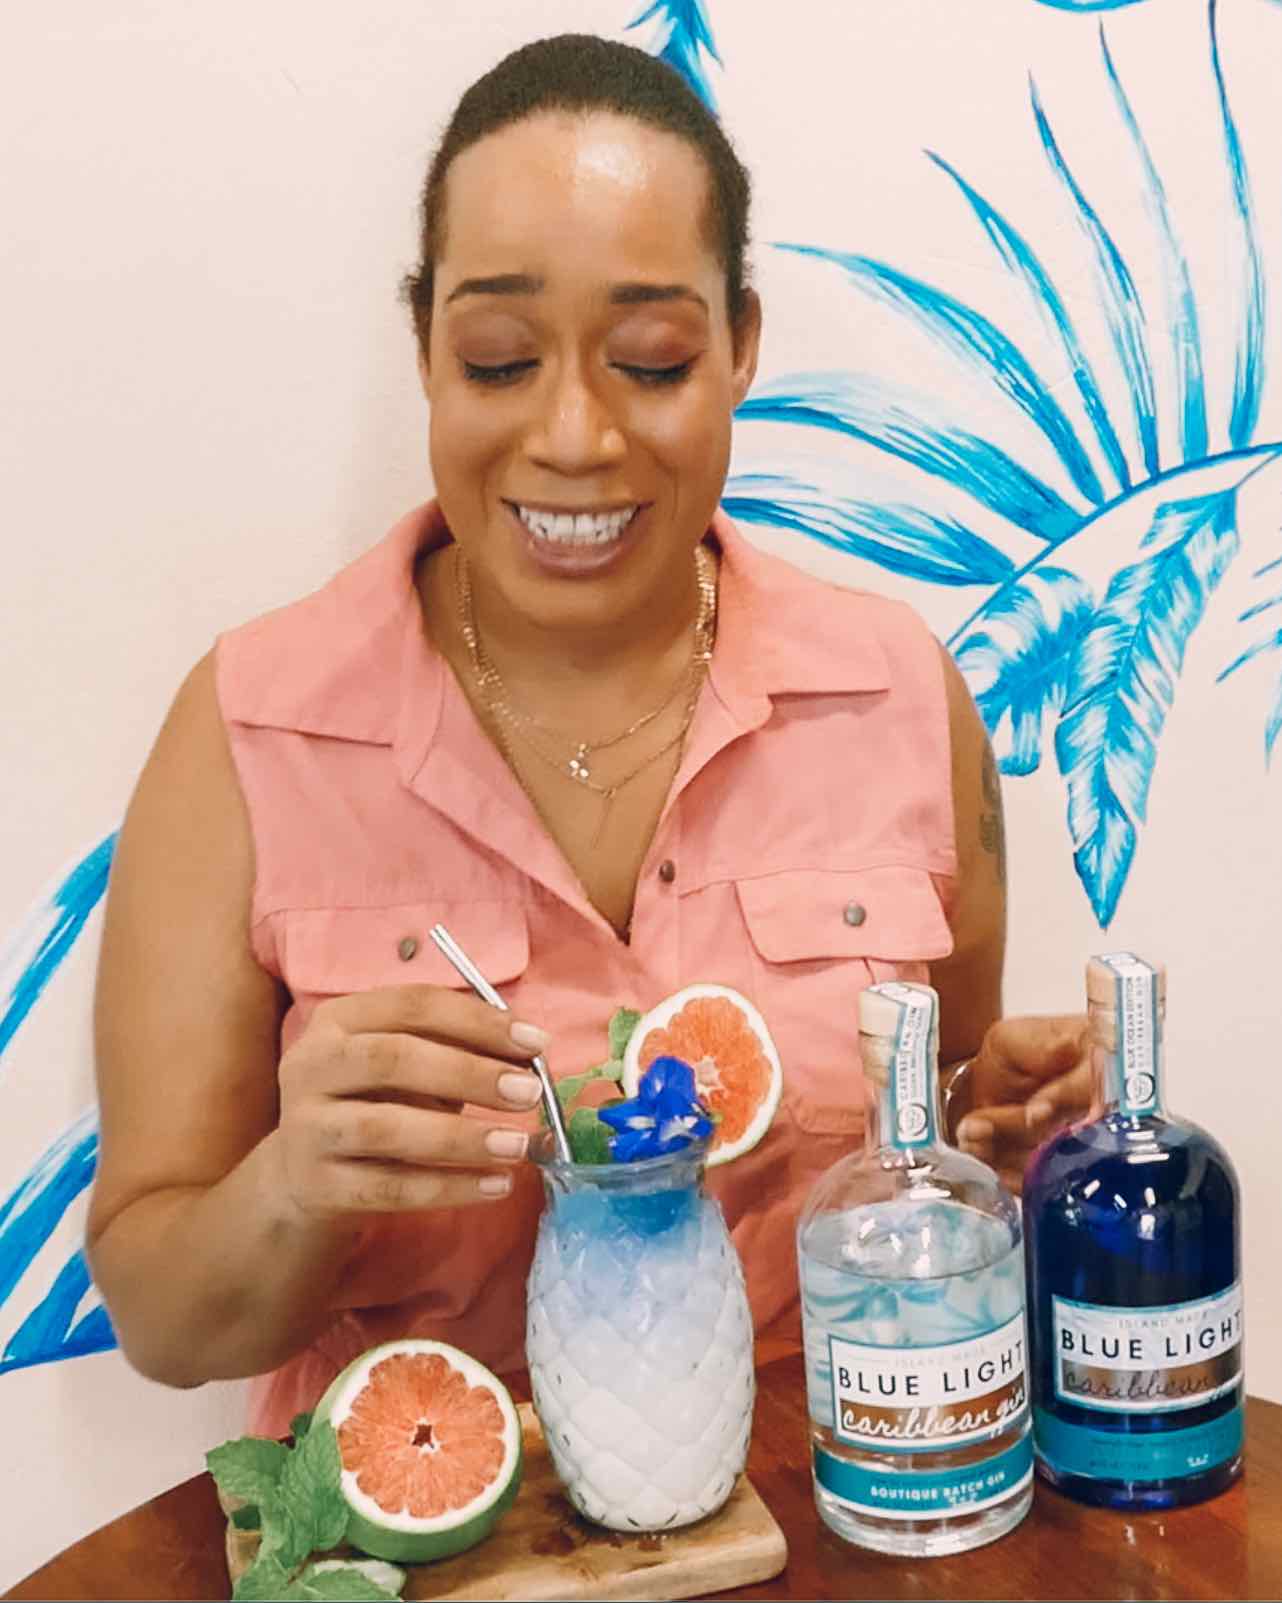 Blue Lit Creamsicle with Blue Light Caribbean Gin